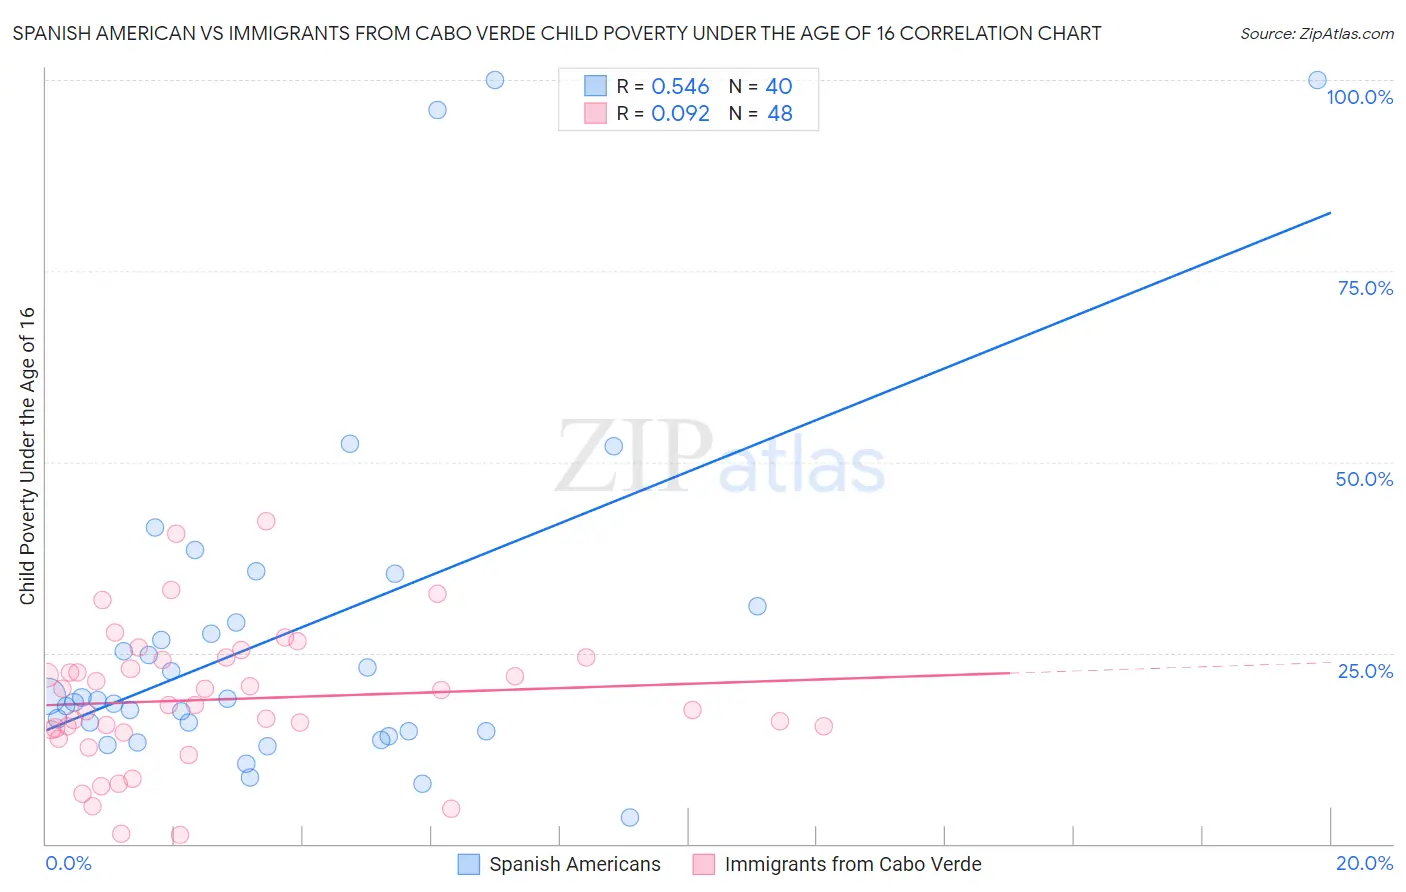 Spanish American vs Immigrants from Cabo Verde Child Poverty Under the Age of 16